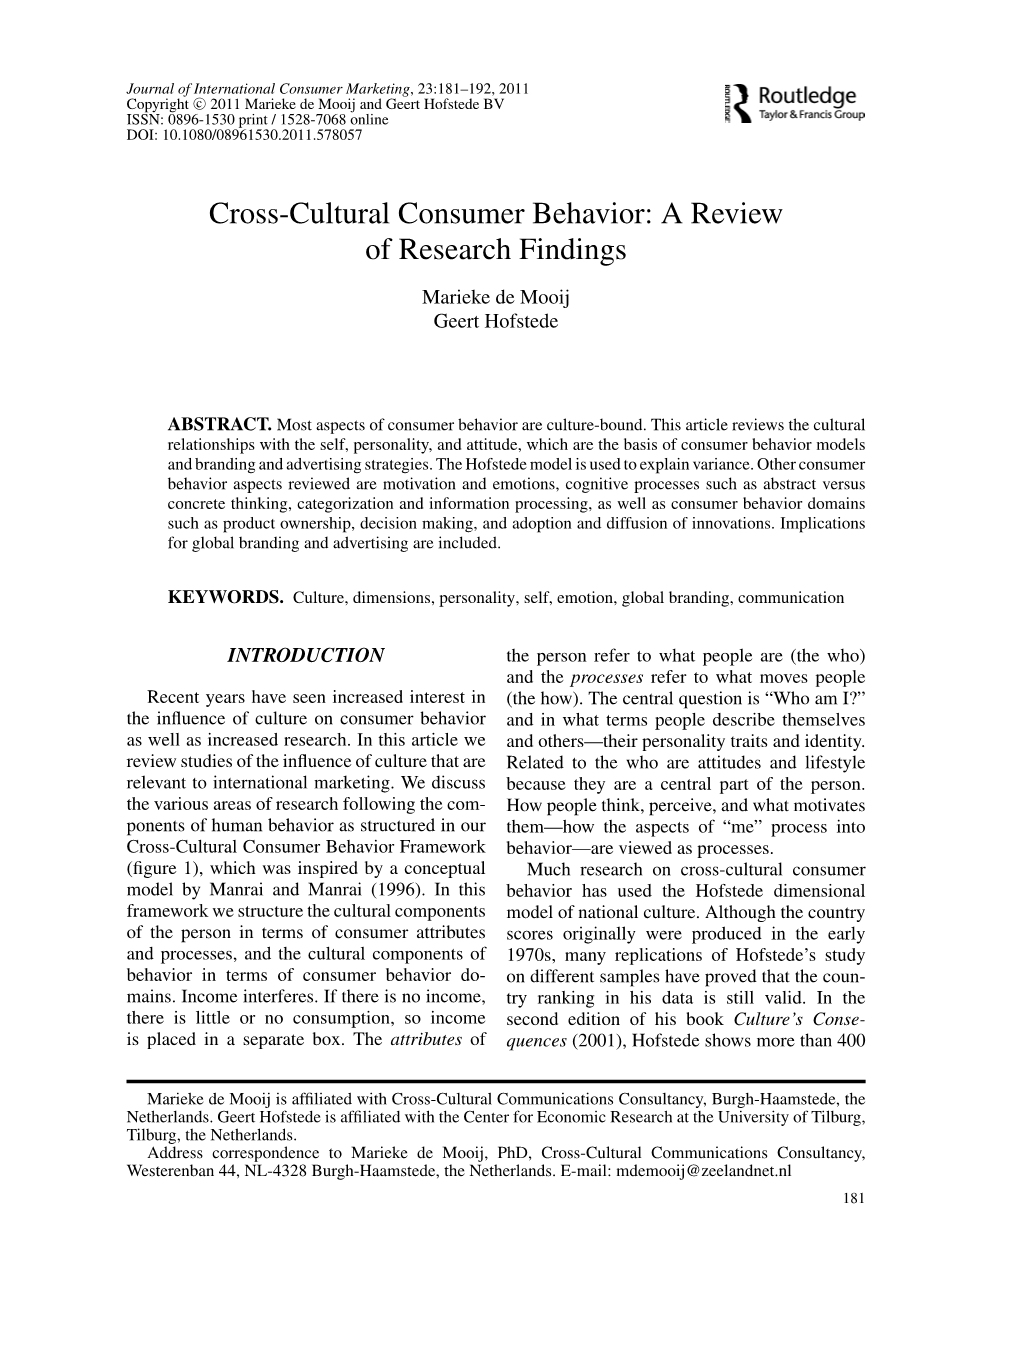 Cross-Cultural Consumer Behavior: a Review of Research Findings